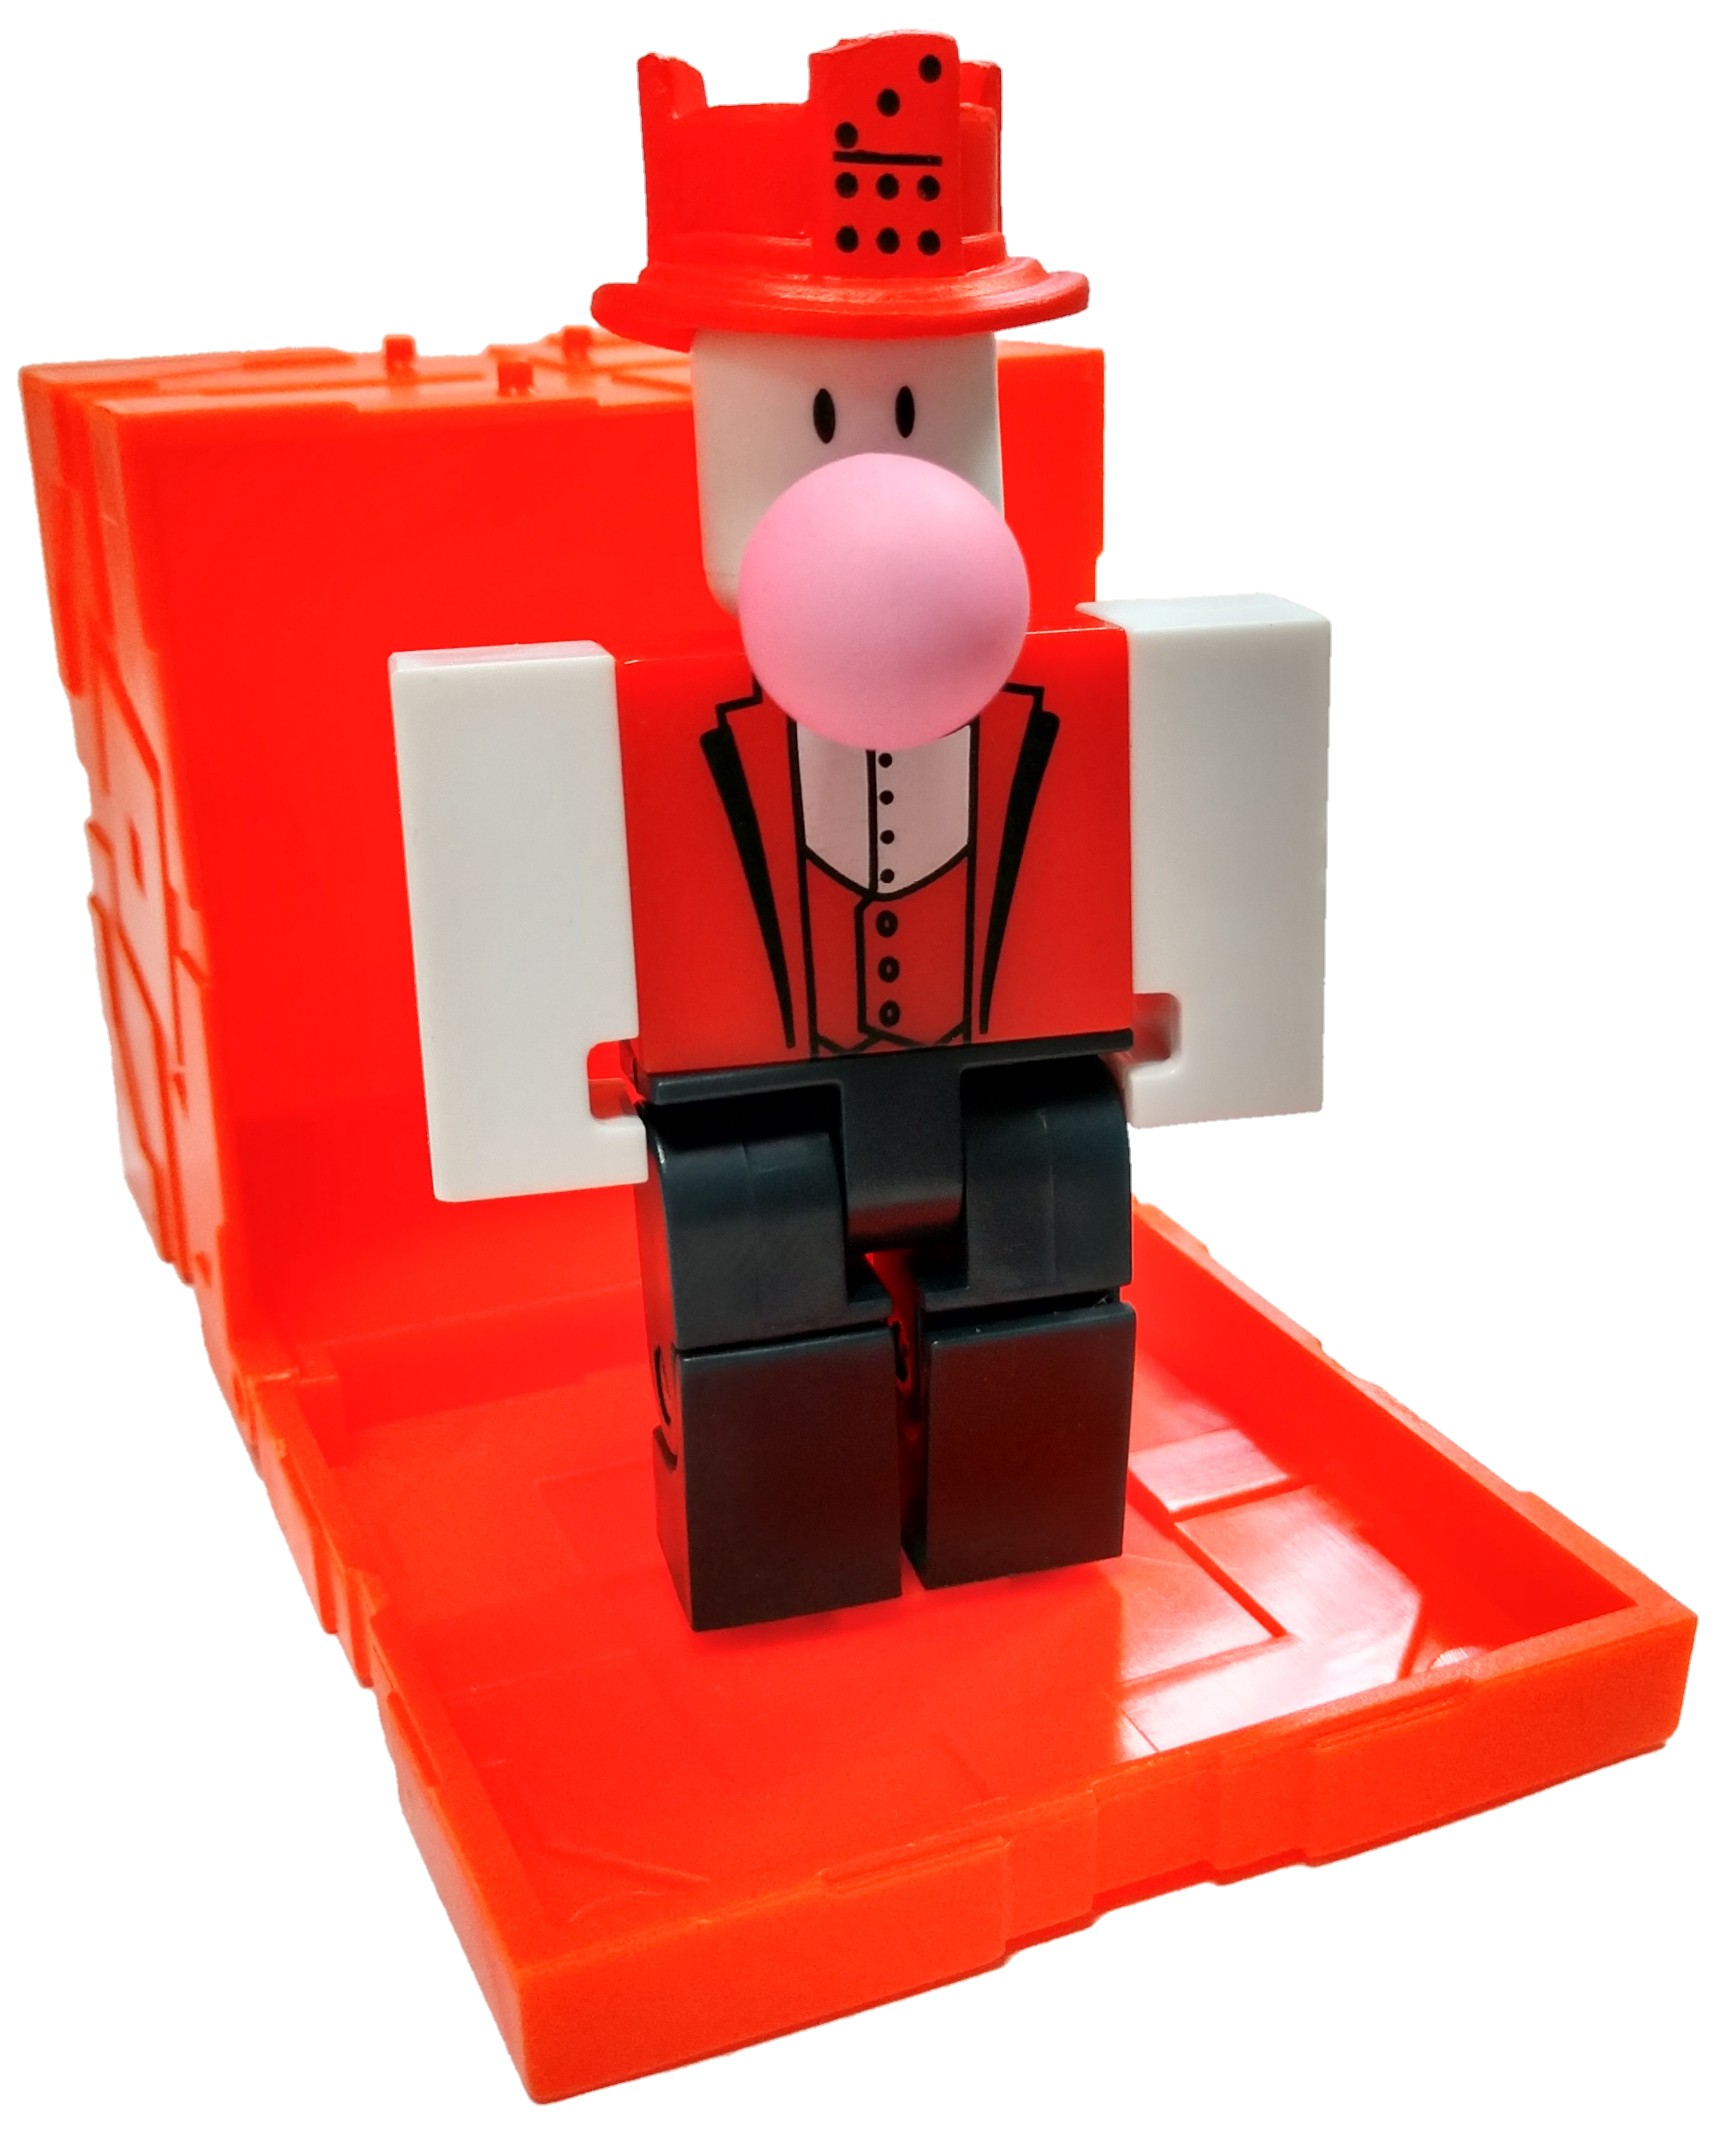 Roblox Series 6 4sci Mini Figure With Online Code 666714325251 Ebay - roblox series 1 action figure mystery bo buy online in guernsey at desertcart